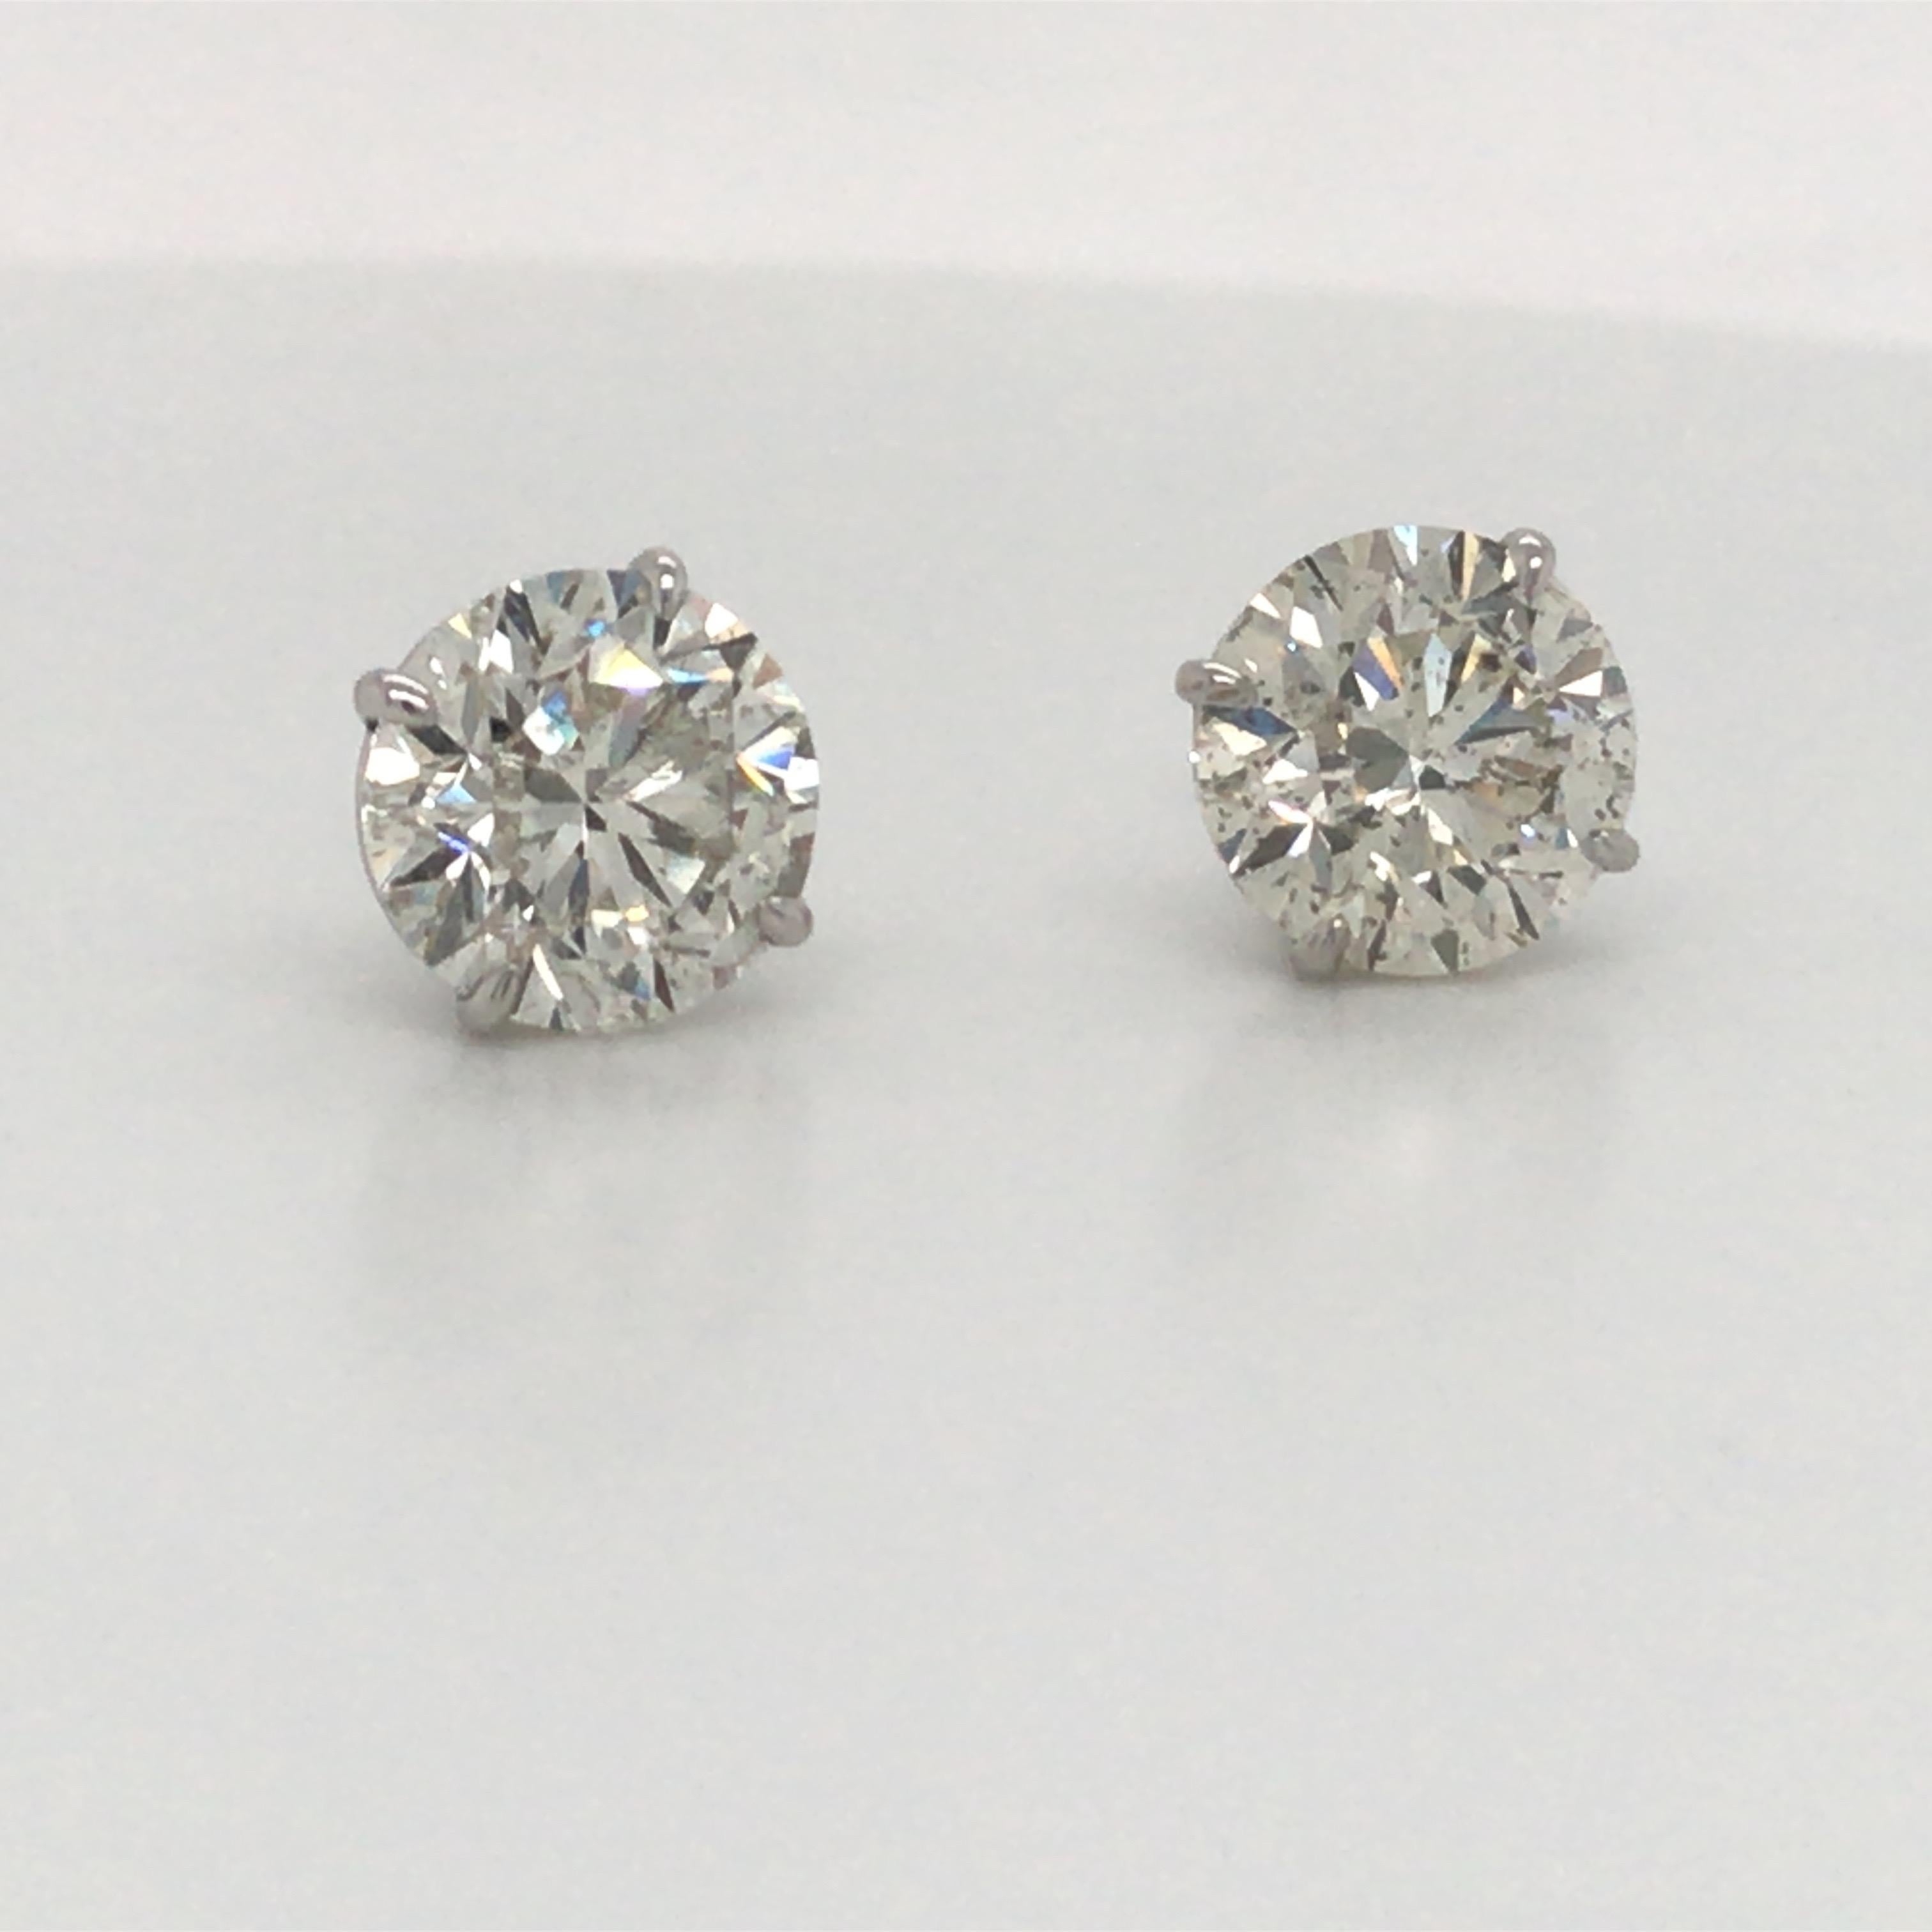 18K White gold diamnd stud earrings weighing 6.23 carats in a 4 prong champagne setting.
Color I-J
Clarity SI3-I1 

Please email for our additional 6 carat studs. 